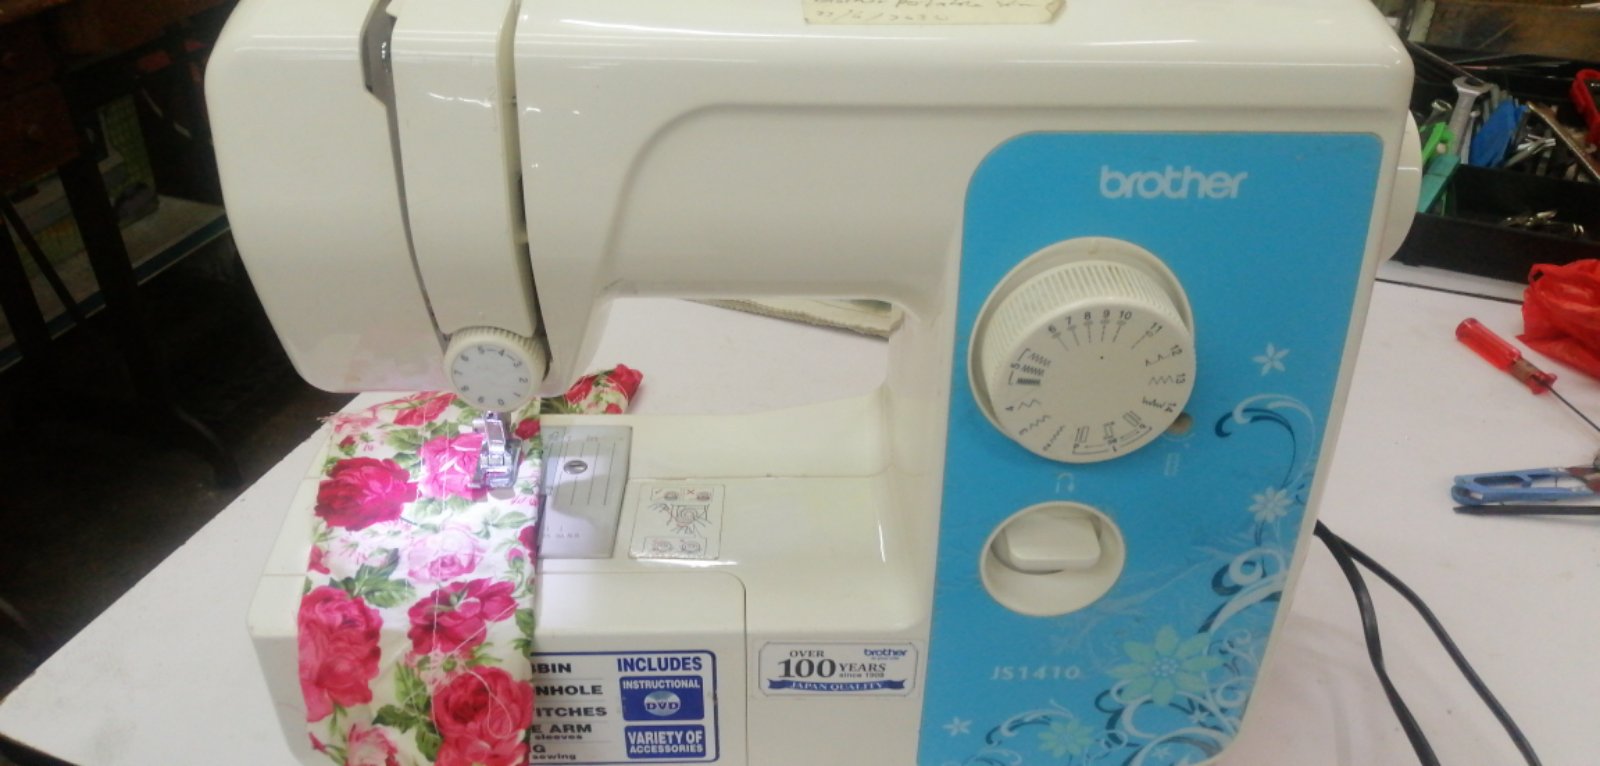 Repair Sevis Brother Portable sewing machine 